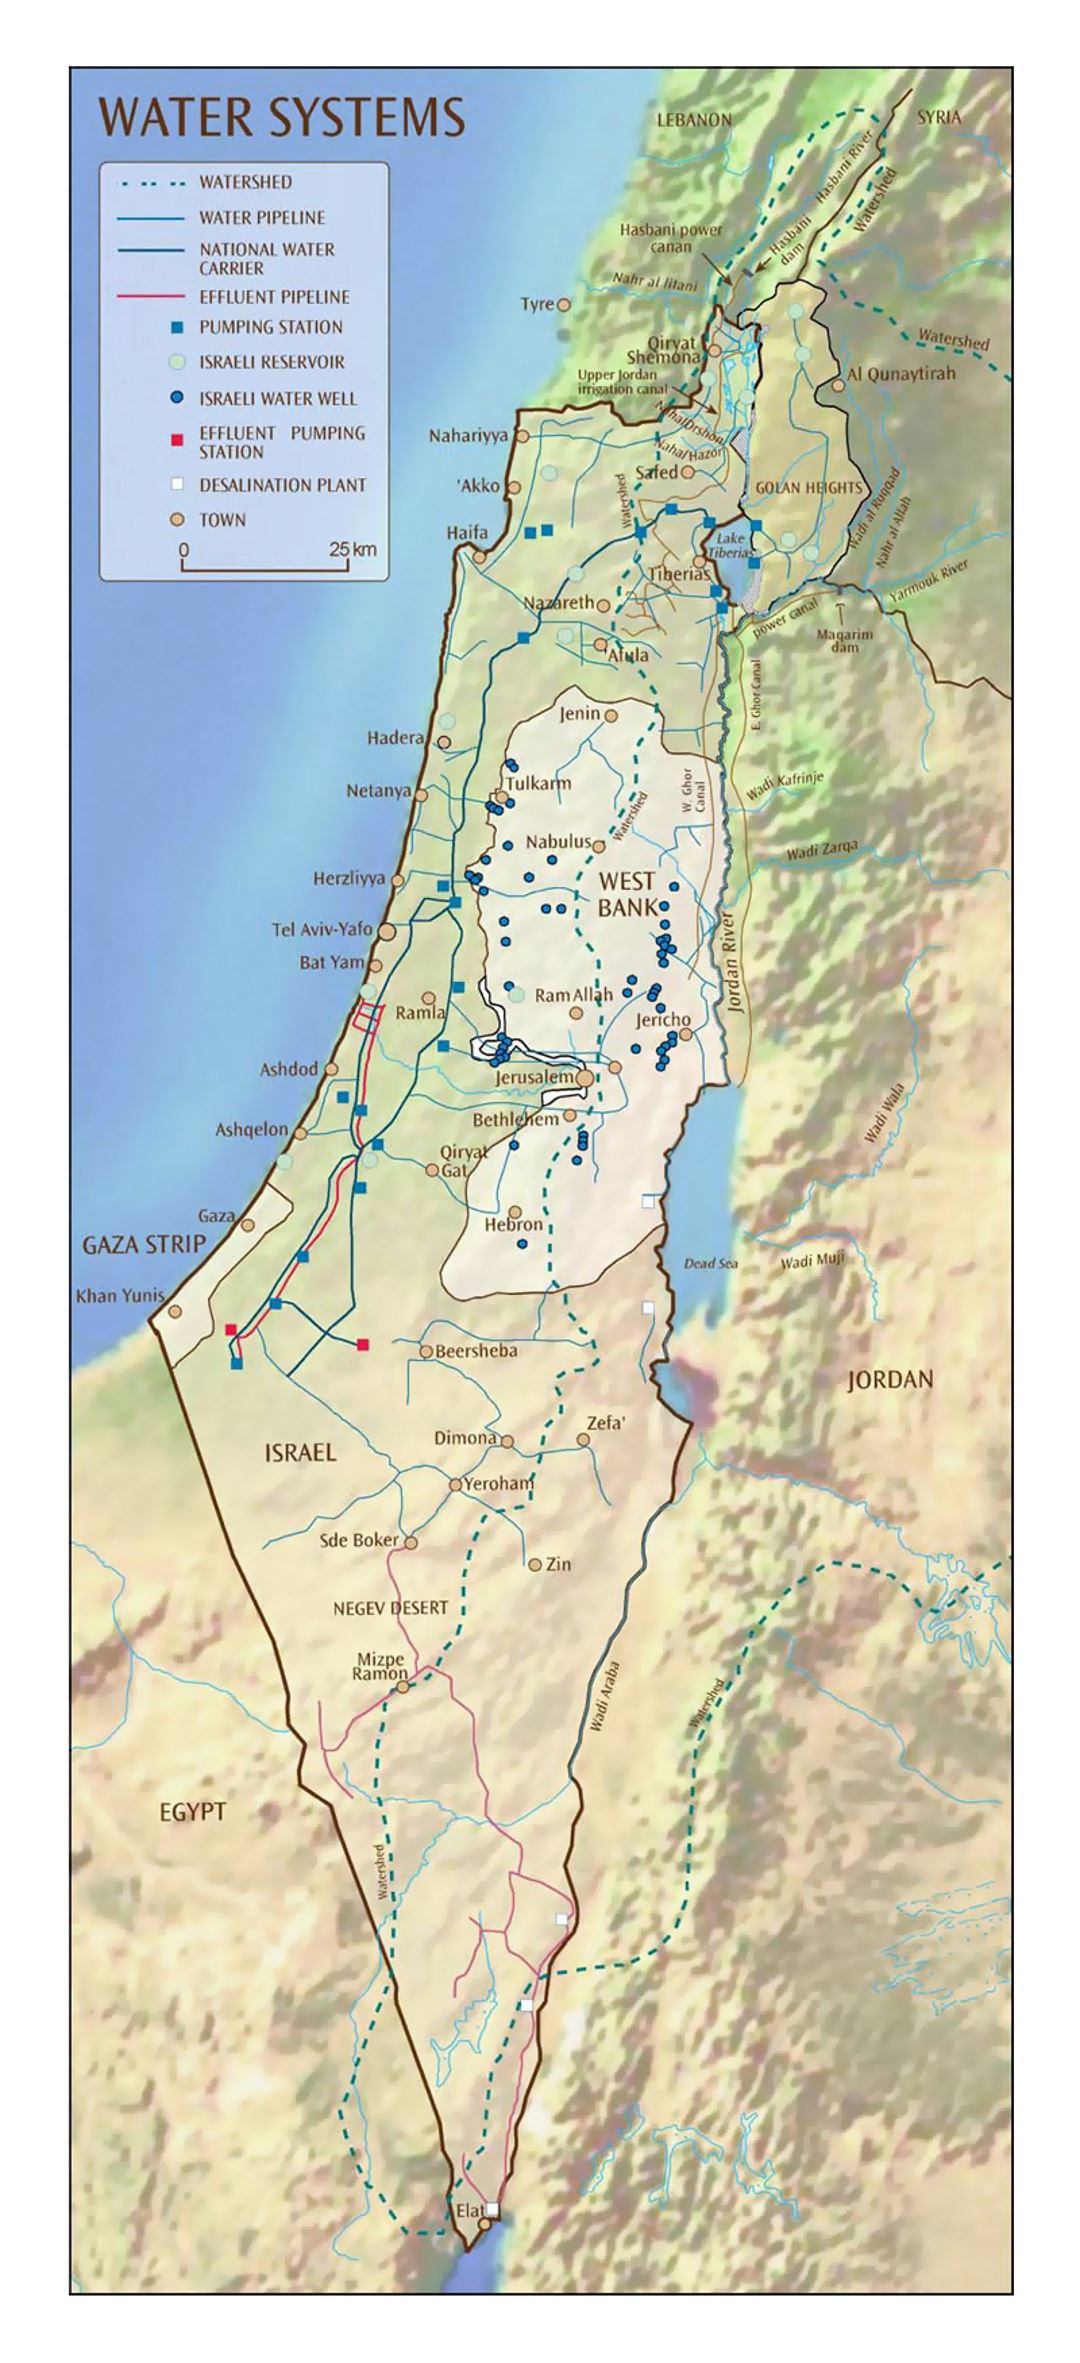 Detailed water systems map of Israel